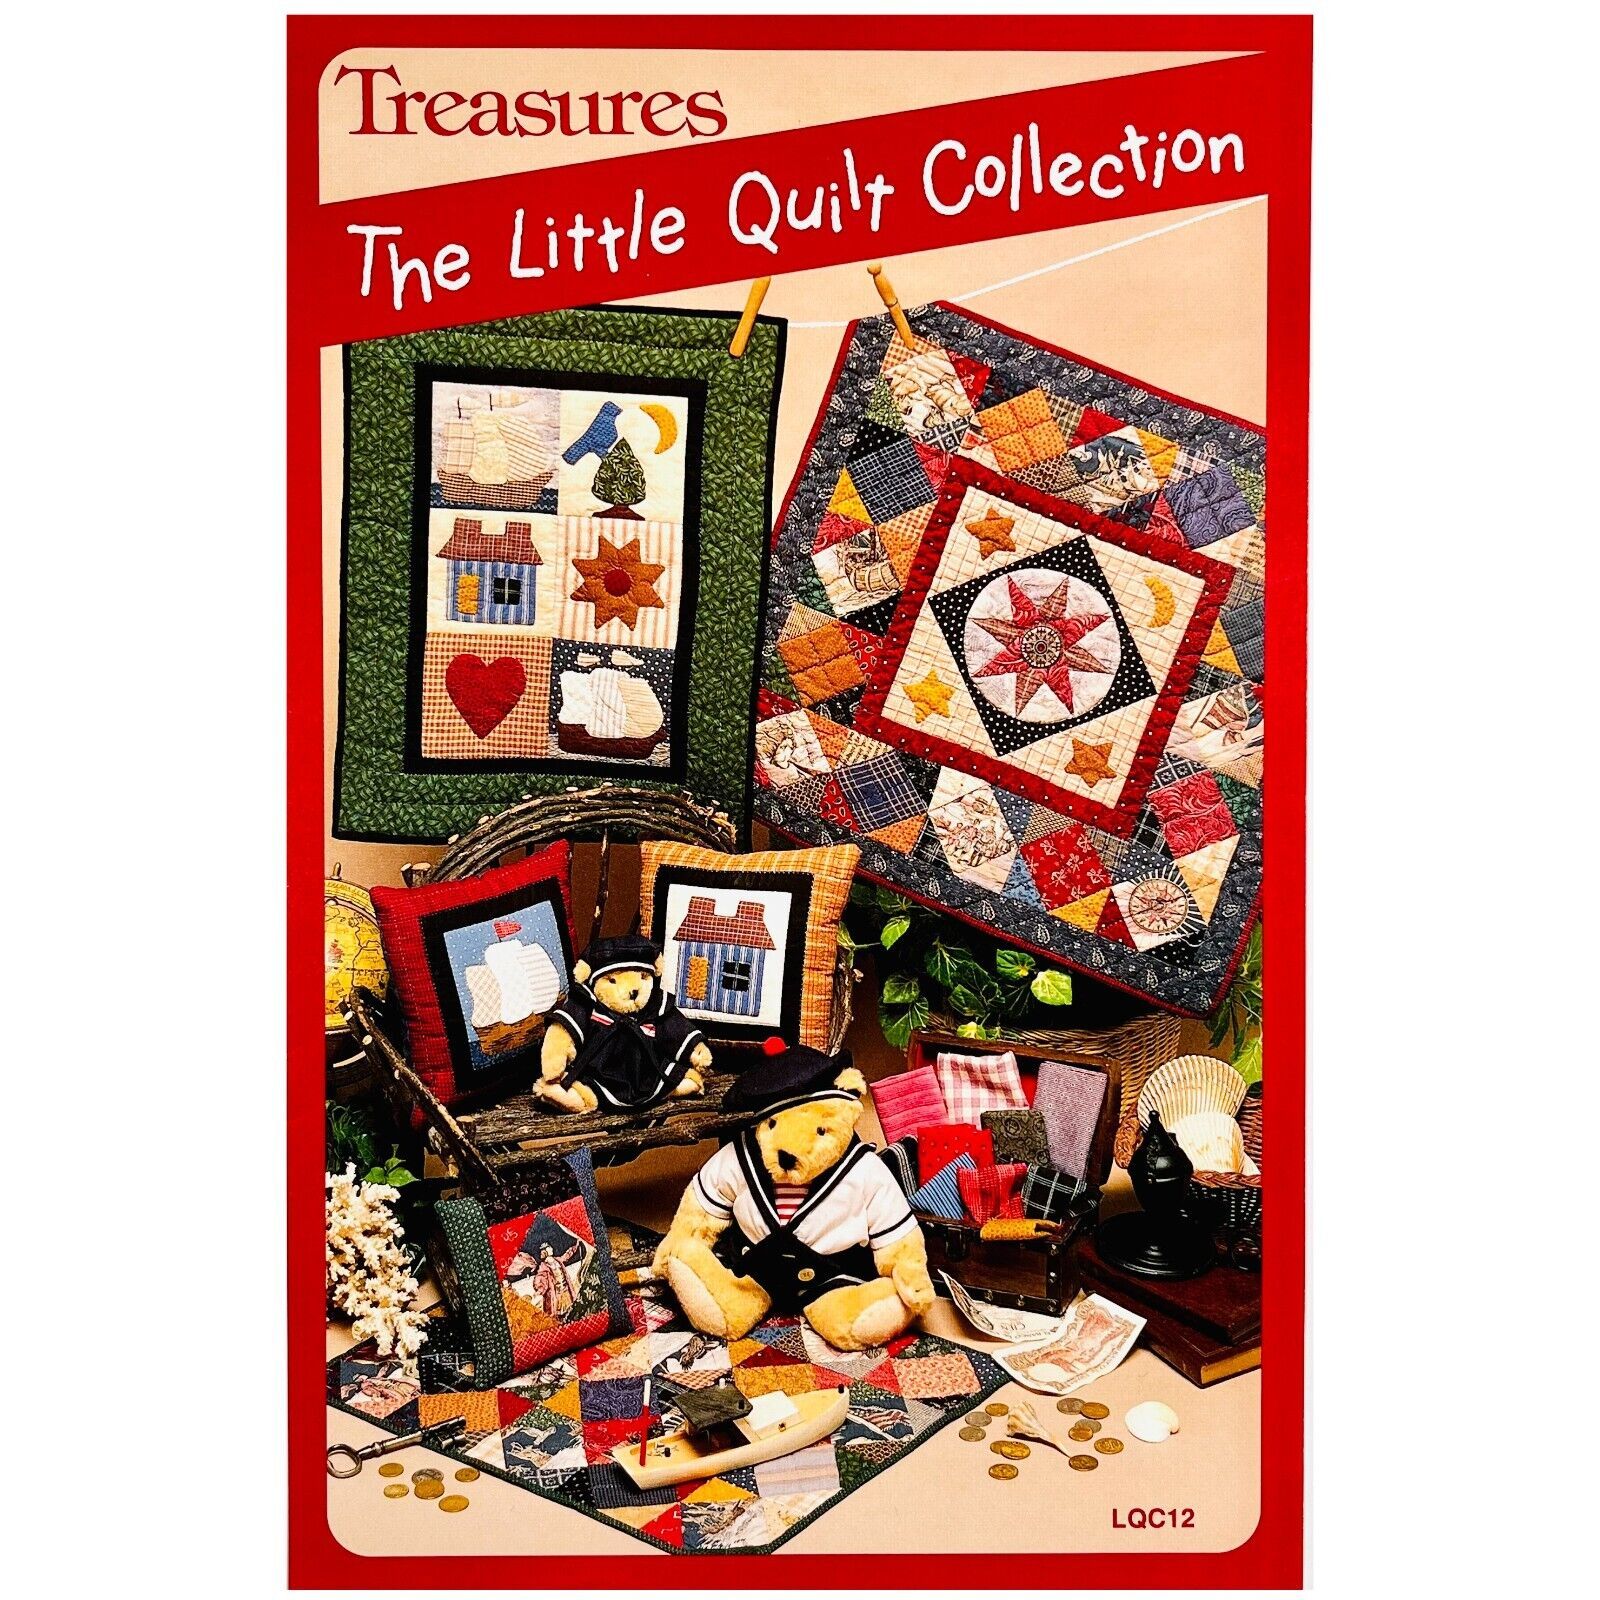 Treasures Star Quilt PATTERN Sampler Quilt Pattern The Little Quilt Collection - $8.99